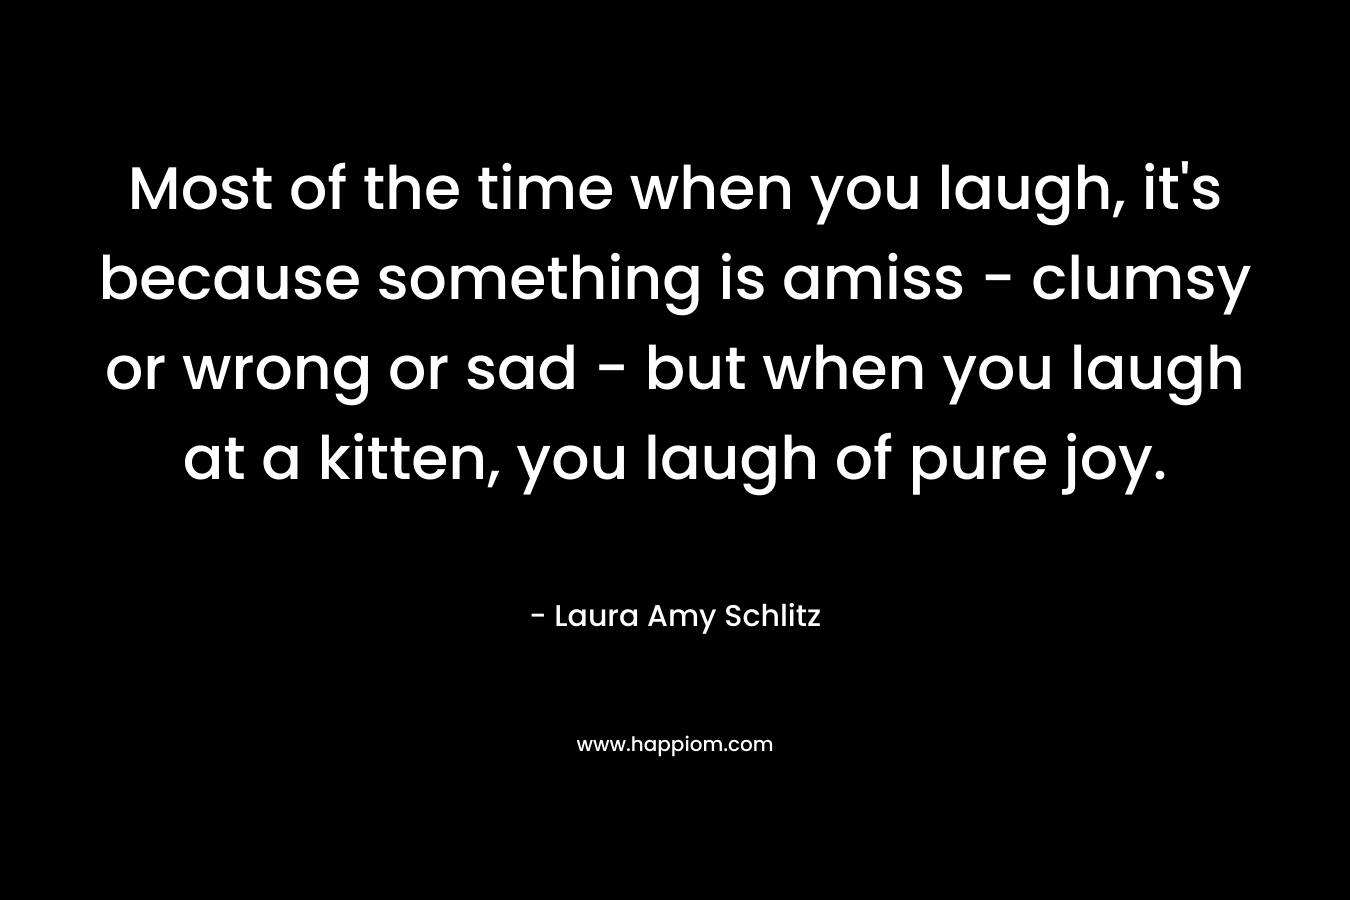 Most of the time when you laugh, it's because something is amiss - clumsy or wrong or sad - but when you laugh at a kitten, you laugh of pure joy.